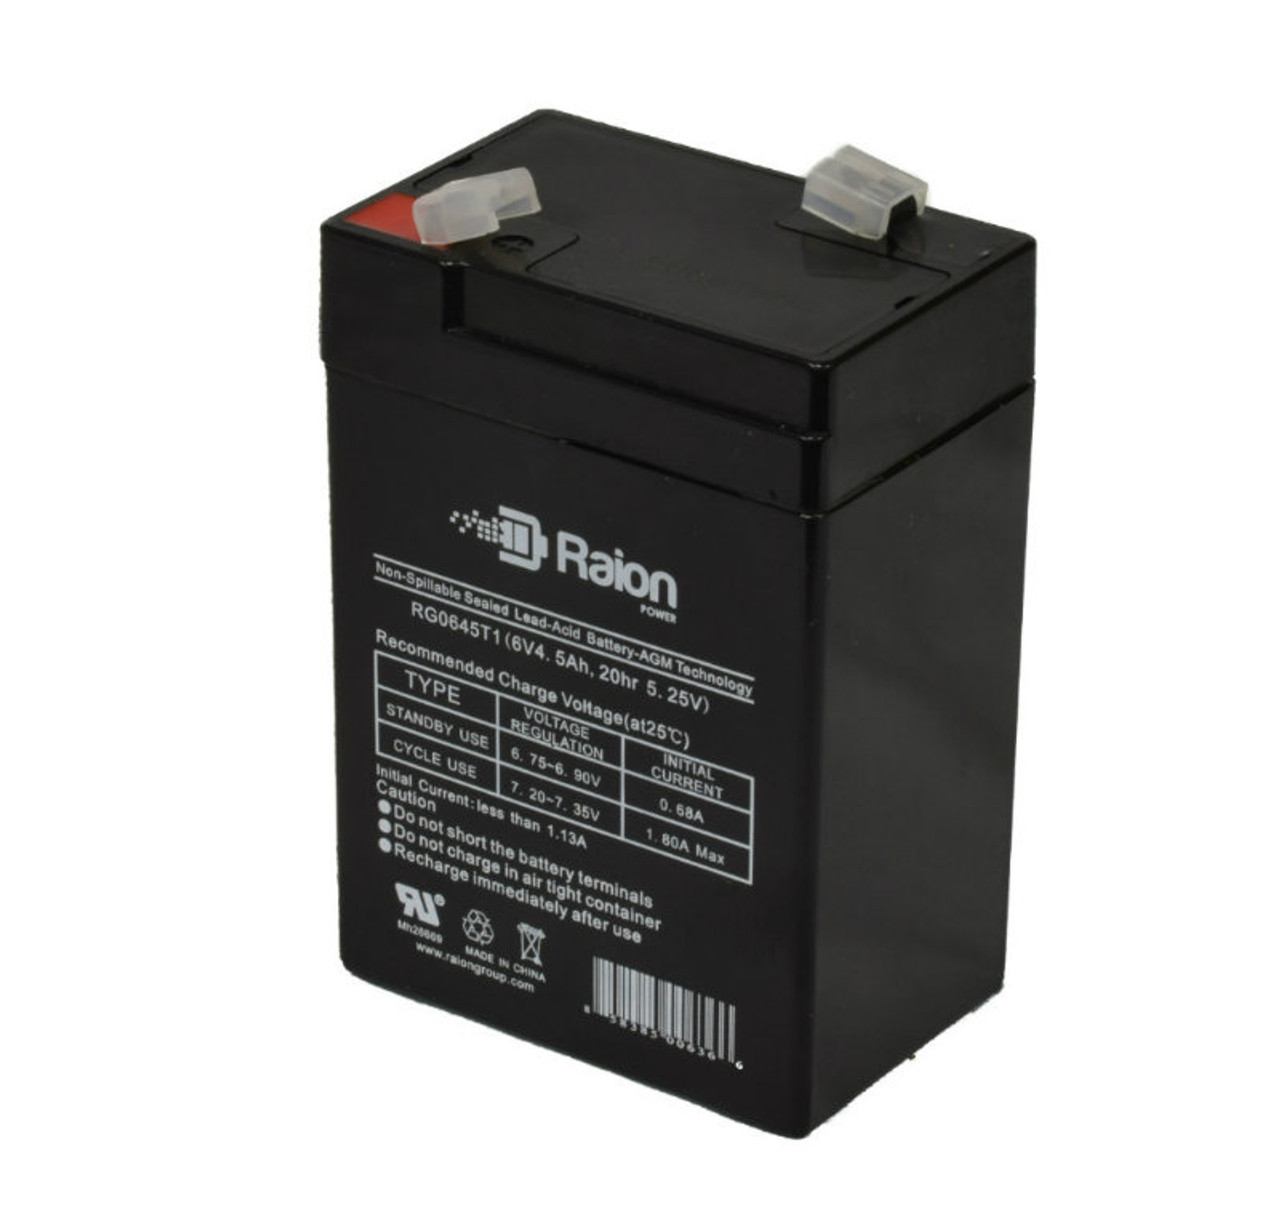 Raion Power RG0645T1 6V 4.5Ah Replacement Battery Cartridge for New Power NS6-5